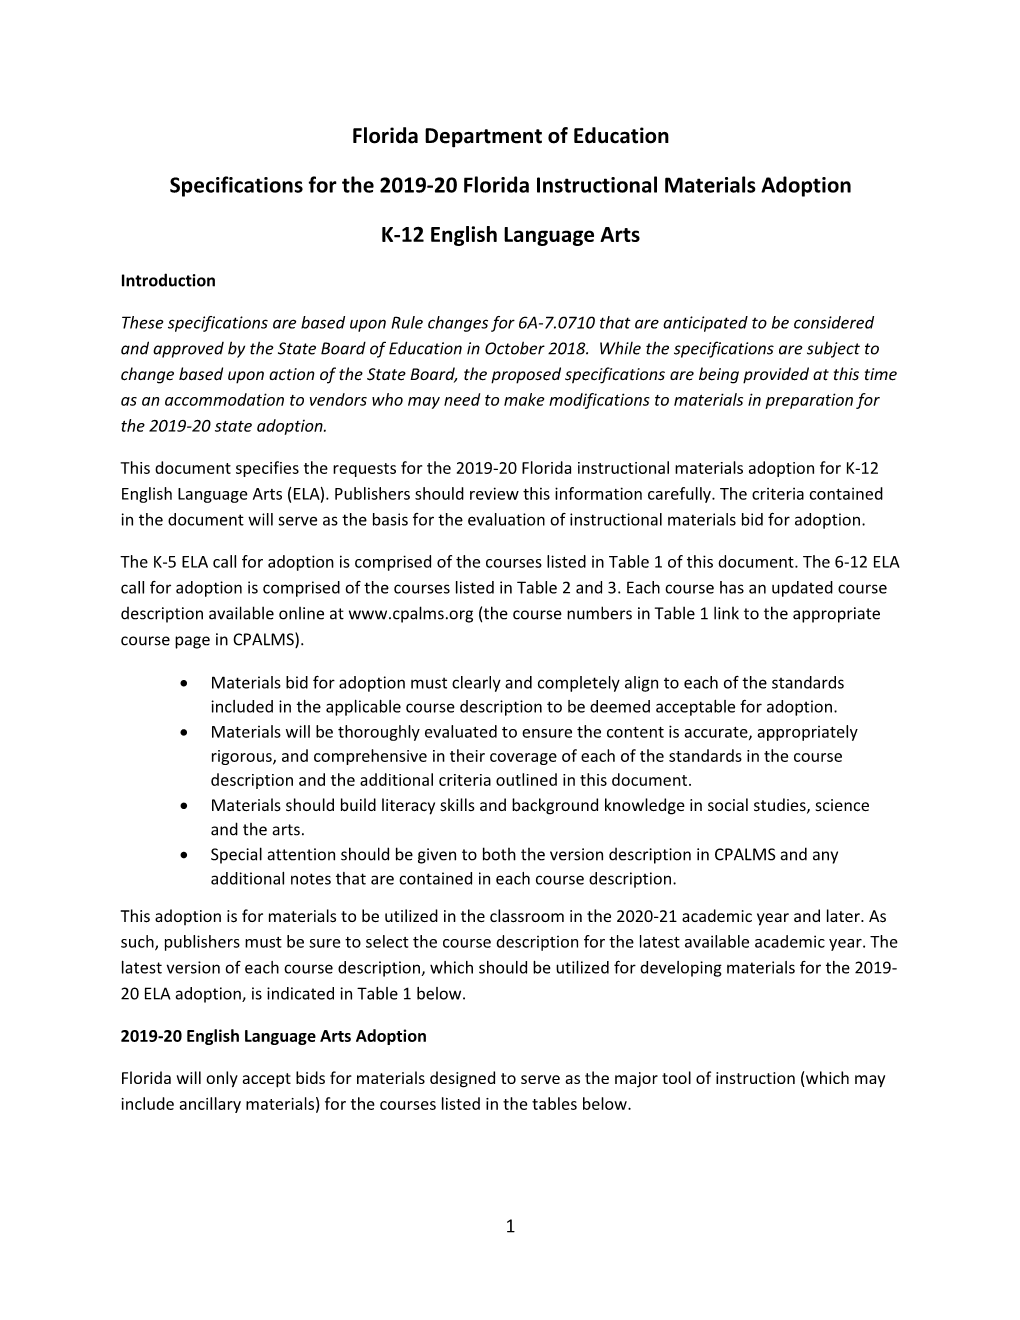 Florida Department of Education Specifications for the 2019-20